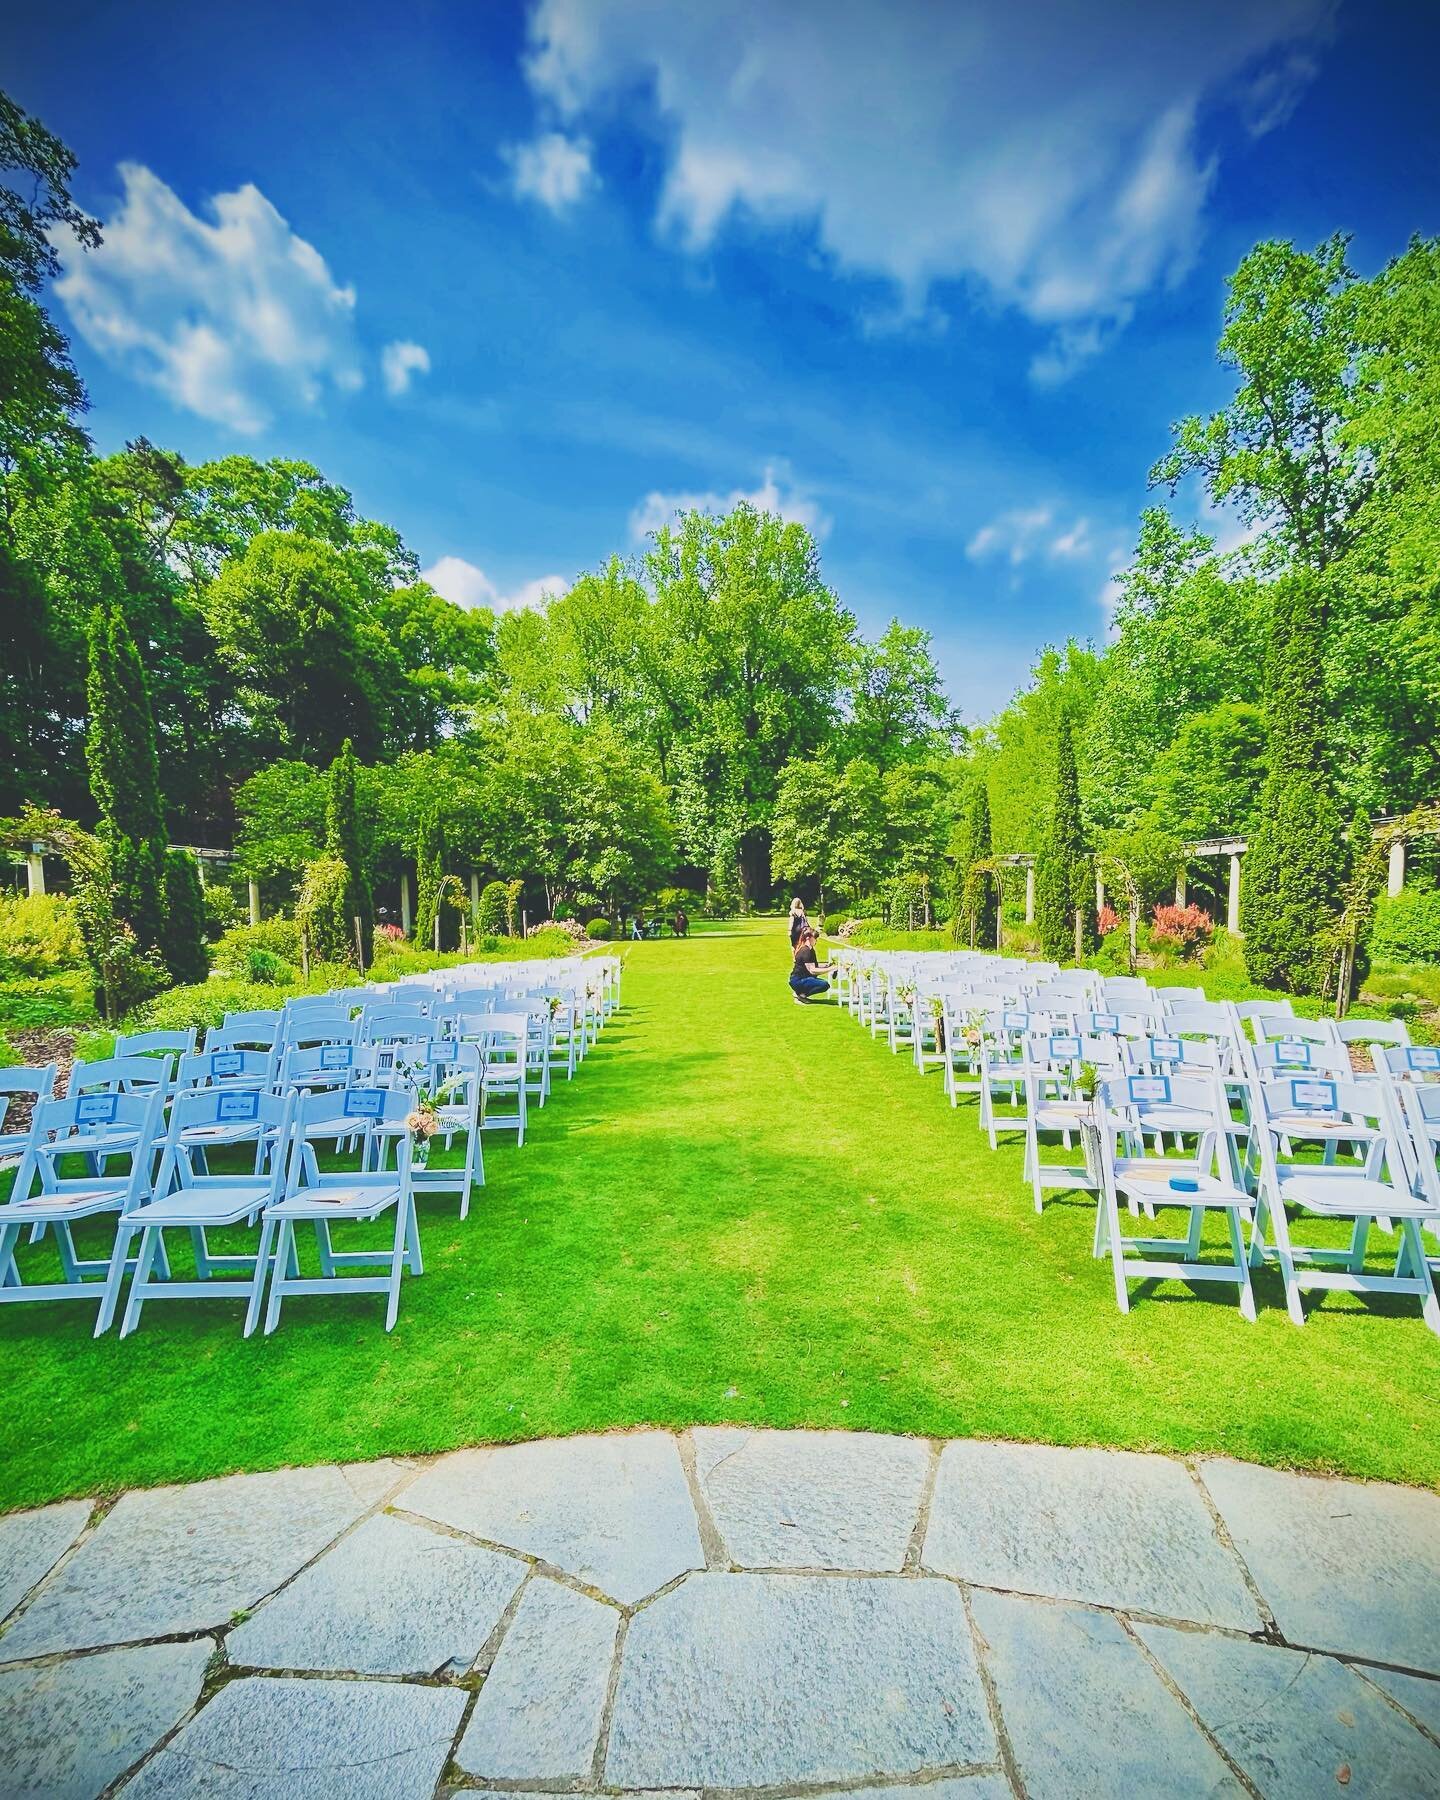 What an absolutely #gorgeous day for a wedding! Congratulations Allison and Randy! We are so excited for new beginnings! You could not have picked a better venue! @catorwoolfordgardens is simply stunning! Thank you to @feteandfigs for once again for 